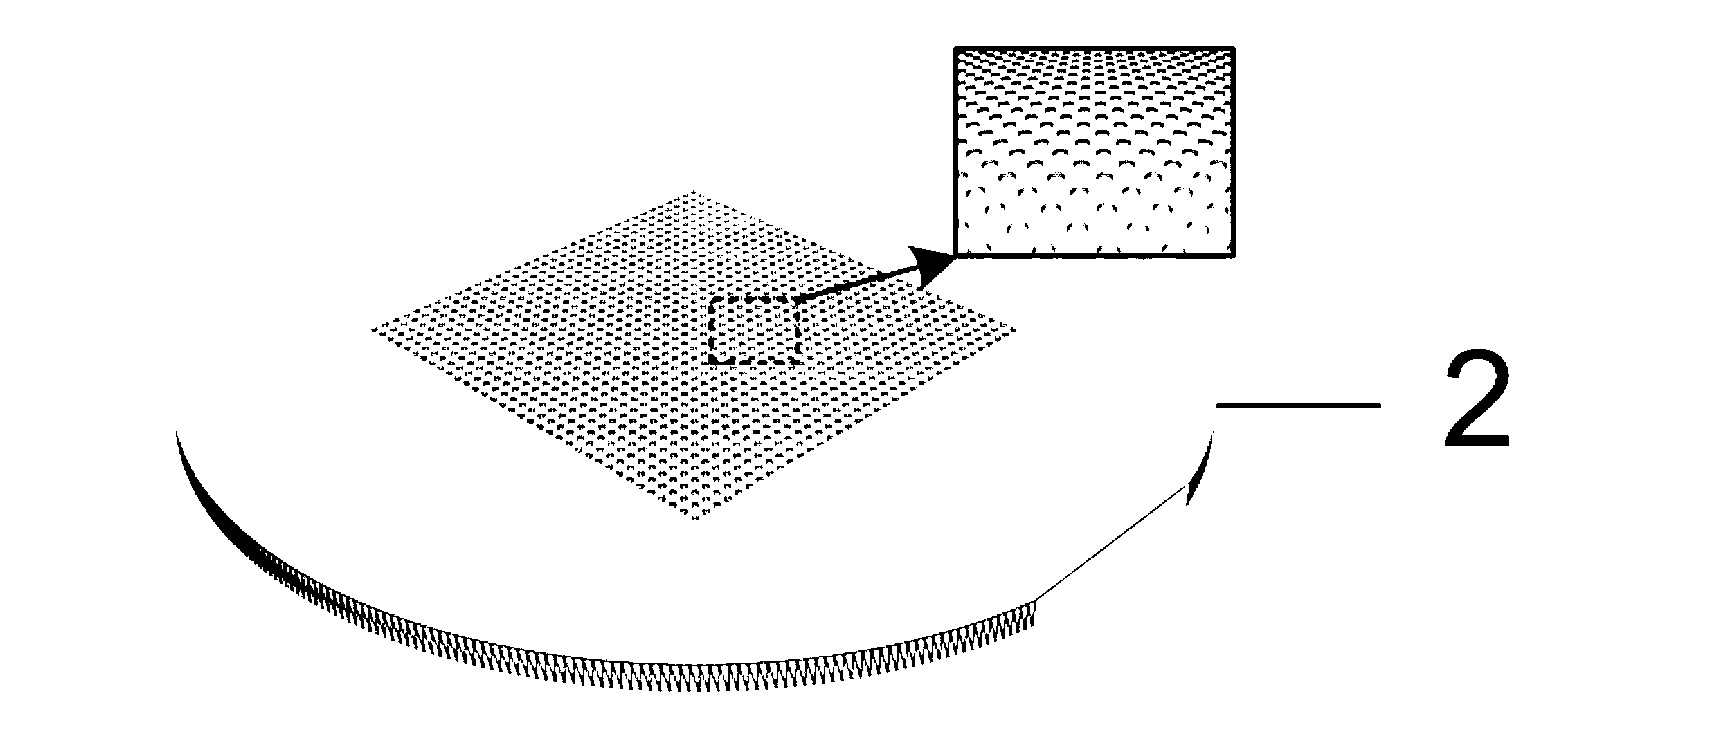 Method for manufacturing polydimethylsiloxane (PDMS) film with integrated microstructure